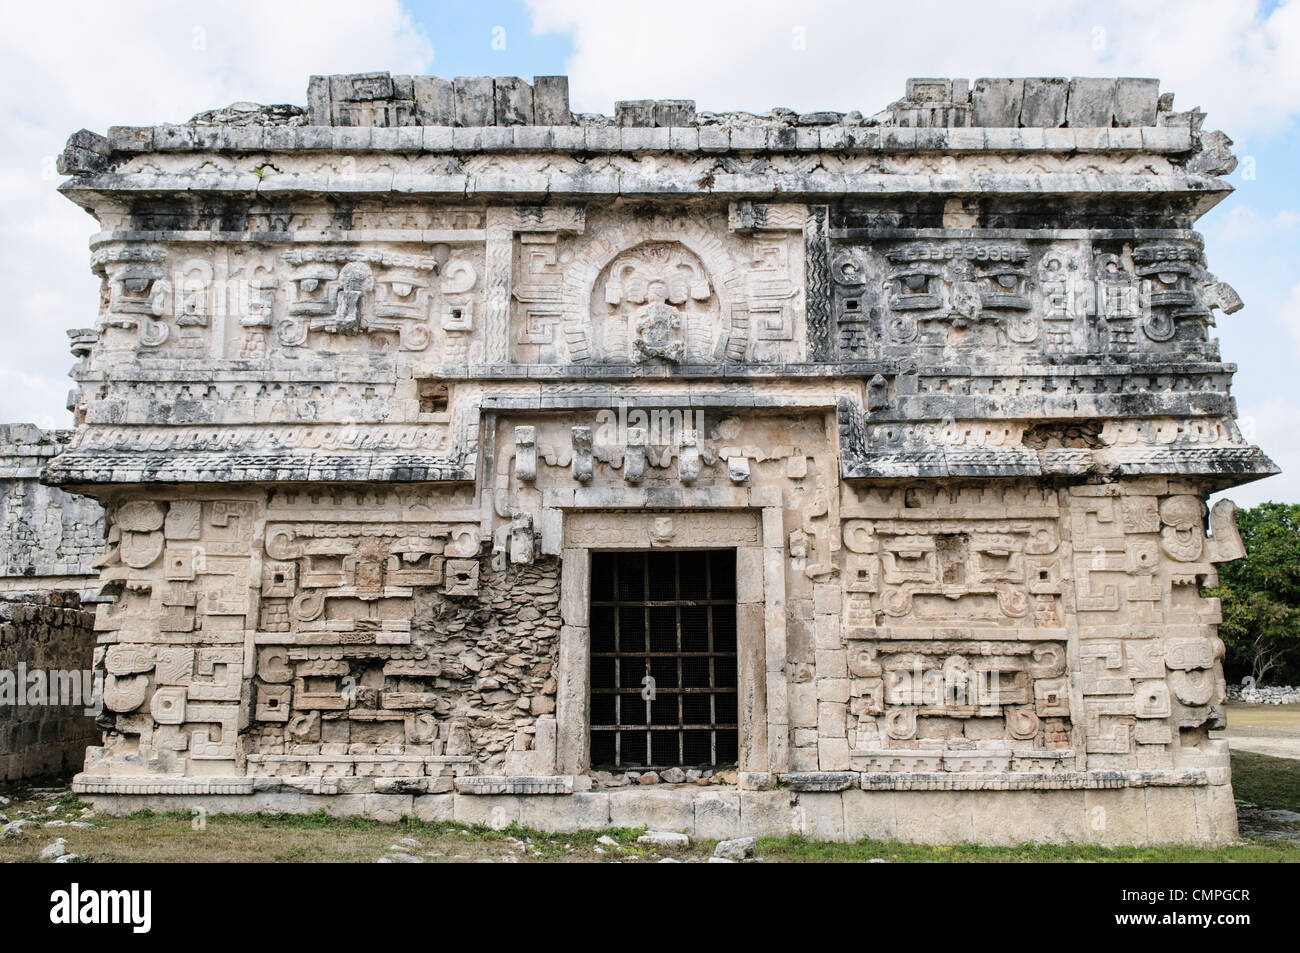 CHICHEN ITZA, Mexico - Intricately decorated buildings at Chichen Itza, a  pre-Columbian archeological site in Yucatan, Mexico. This building is known  as 